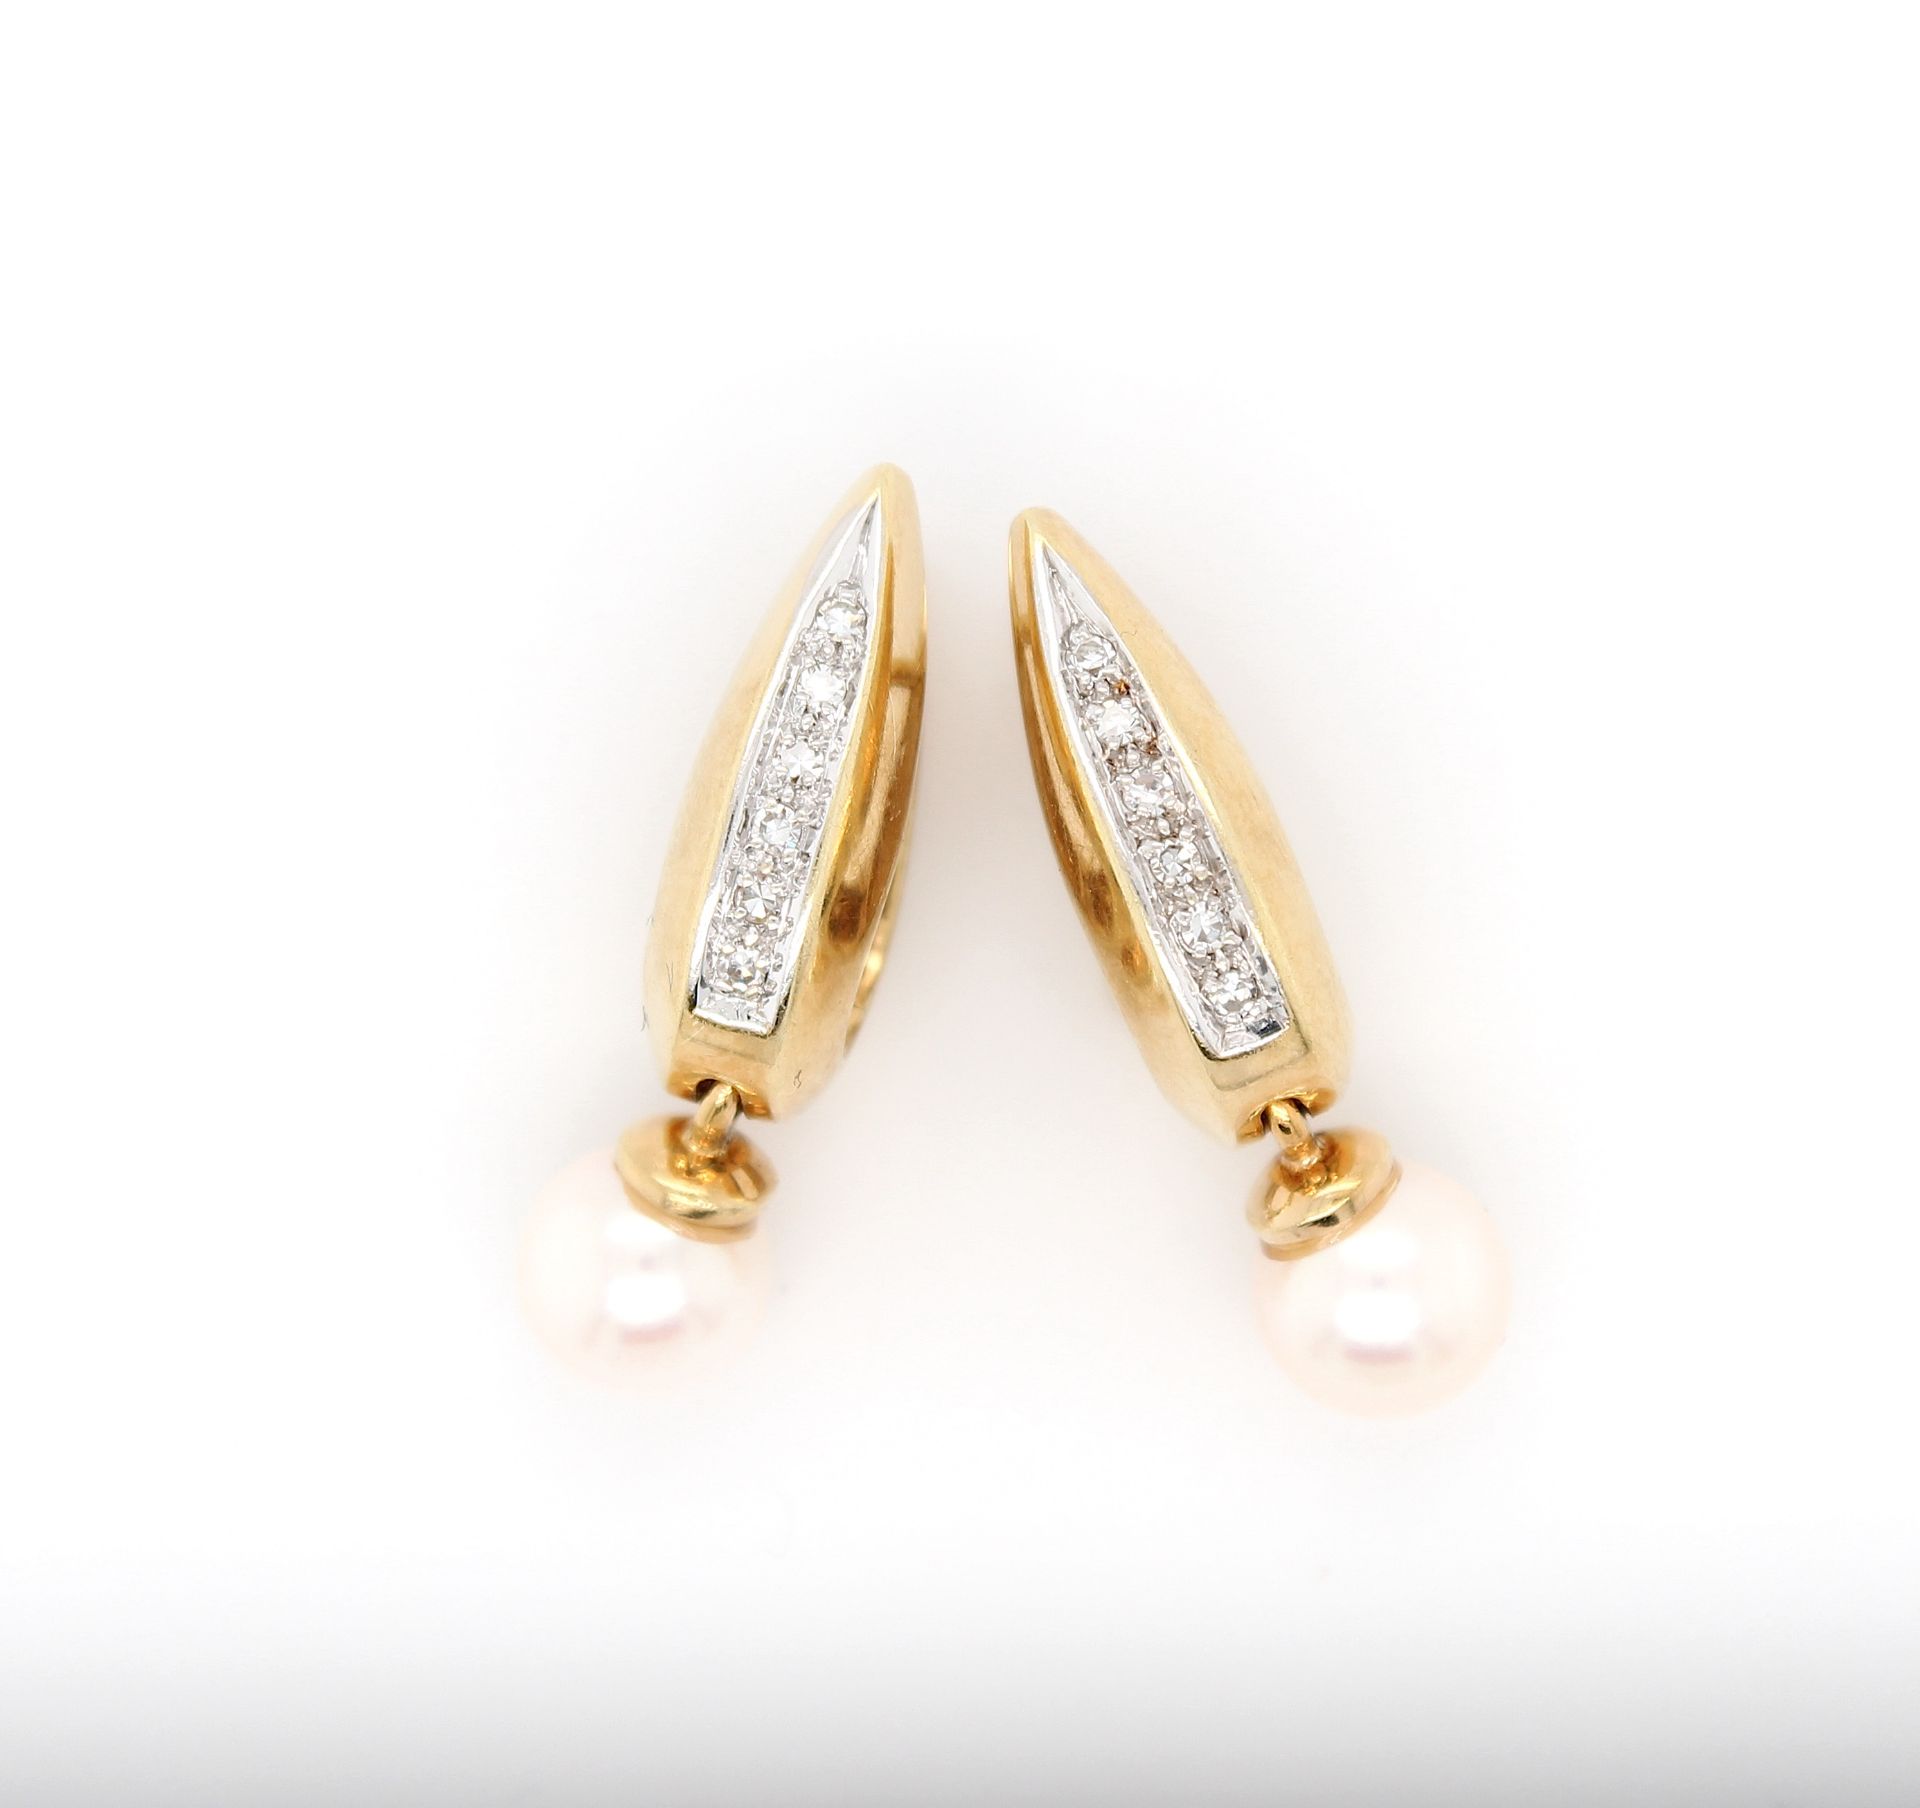 1 pair of earrings with cultured pearls and diamonds - Image 3 of 4